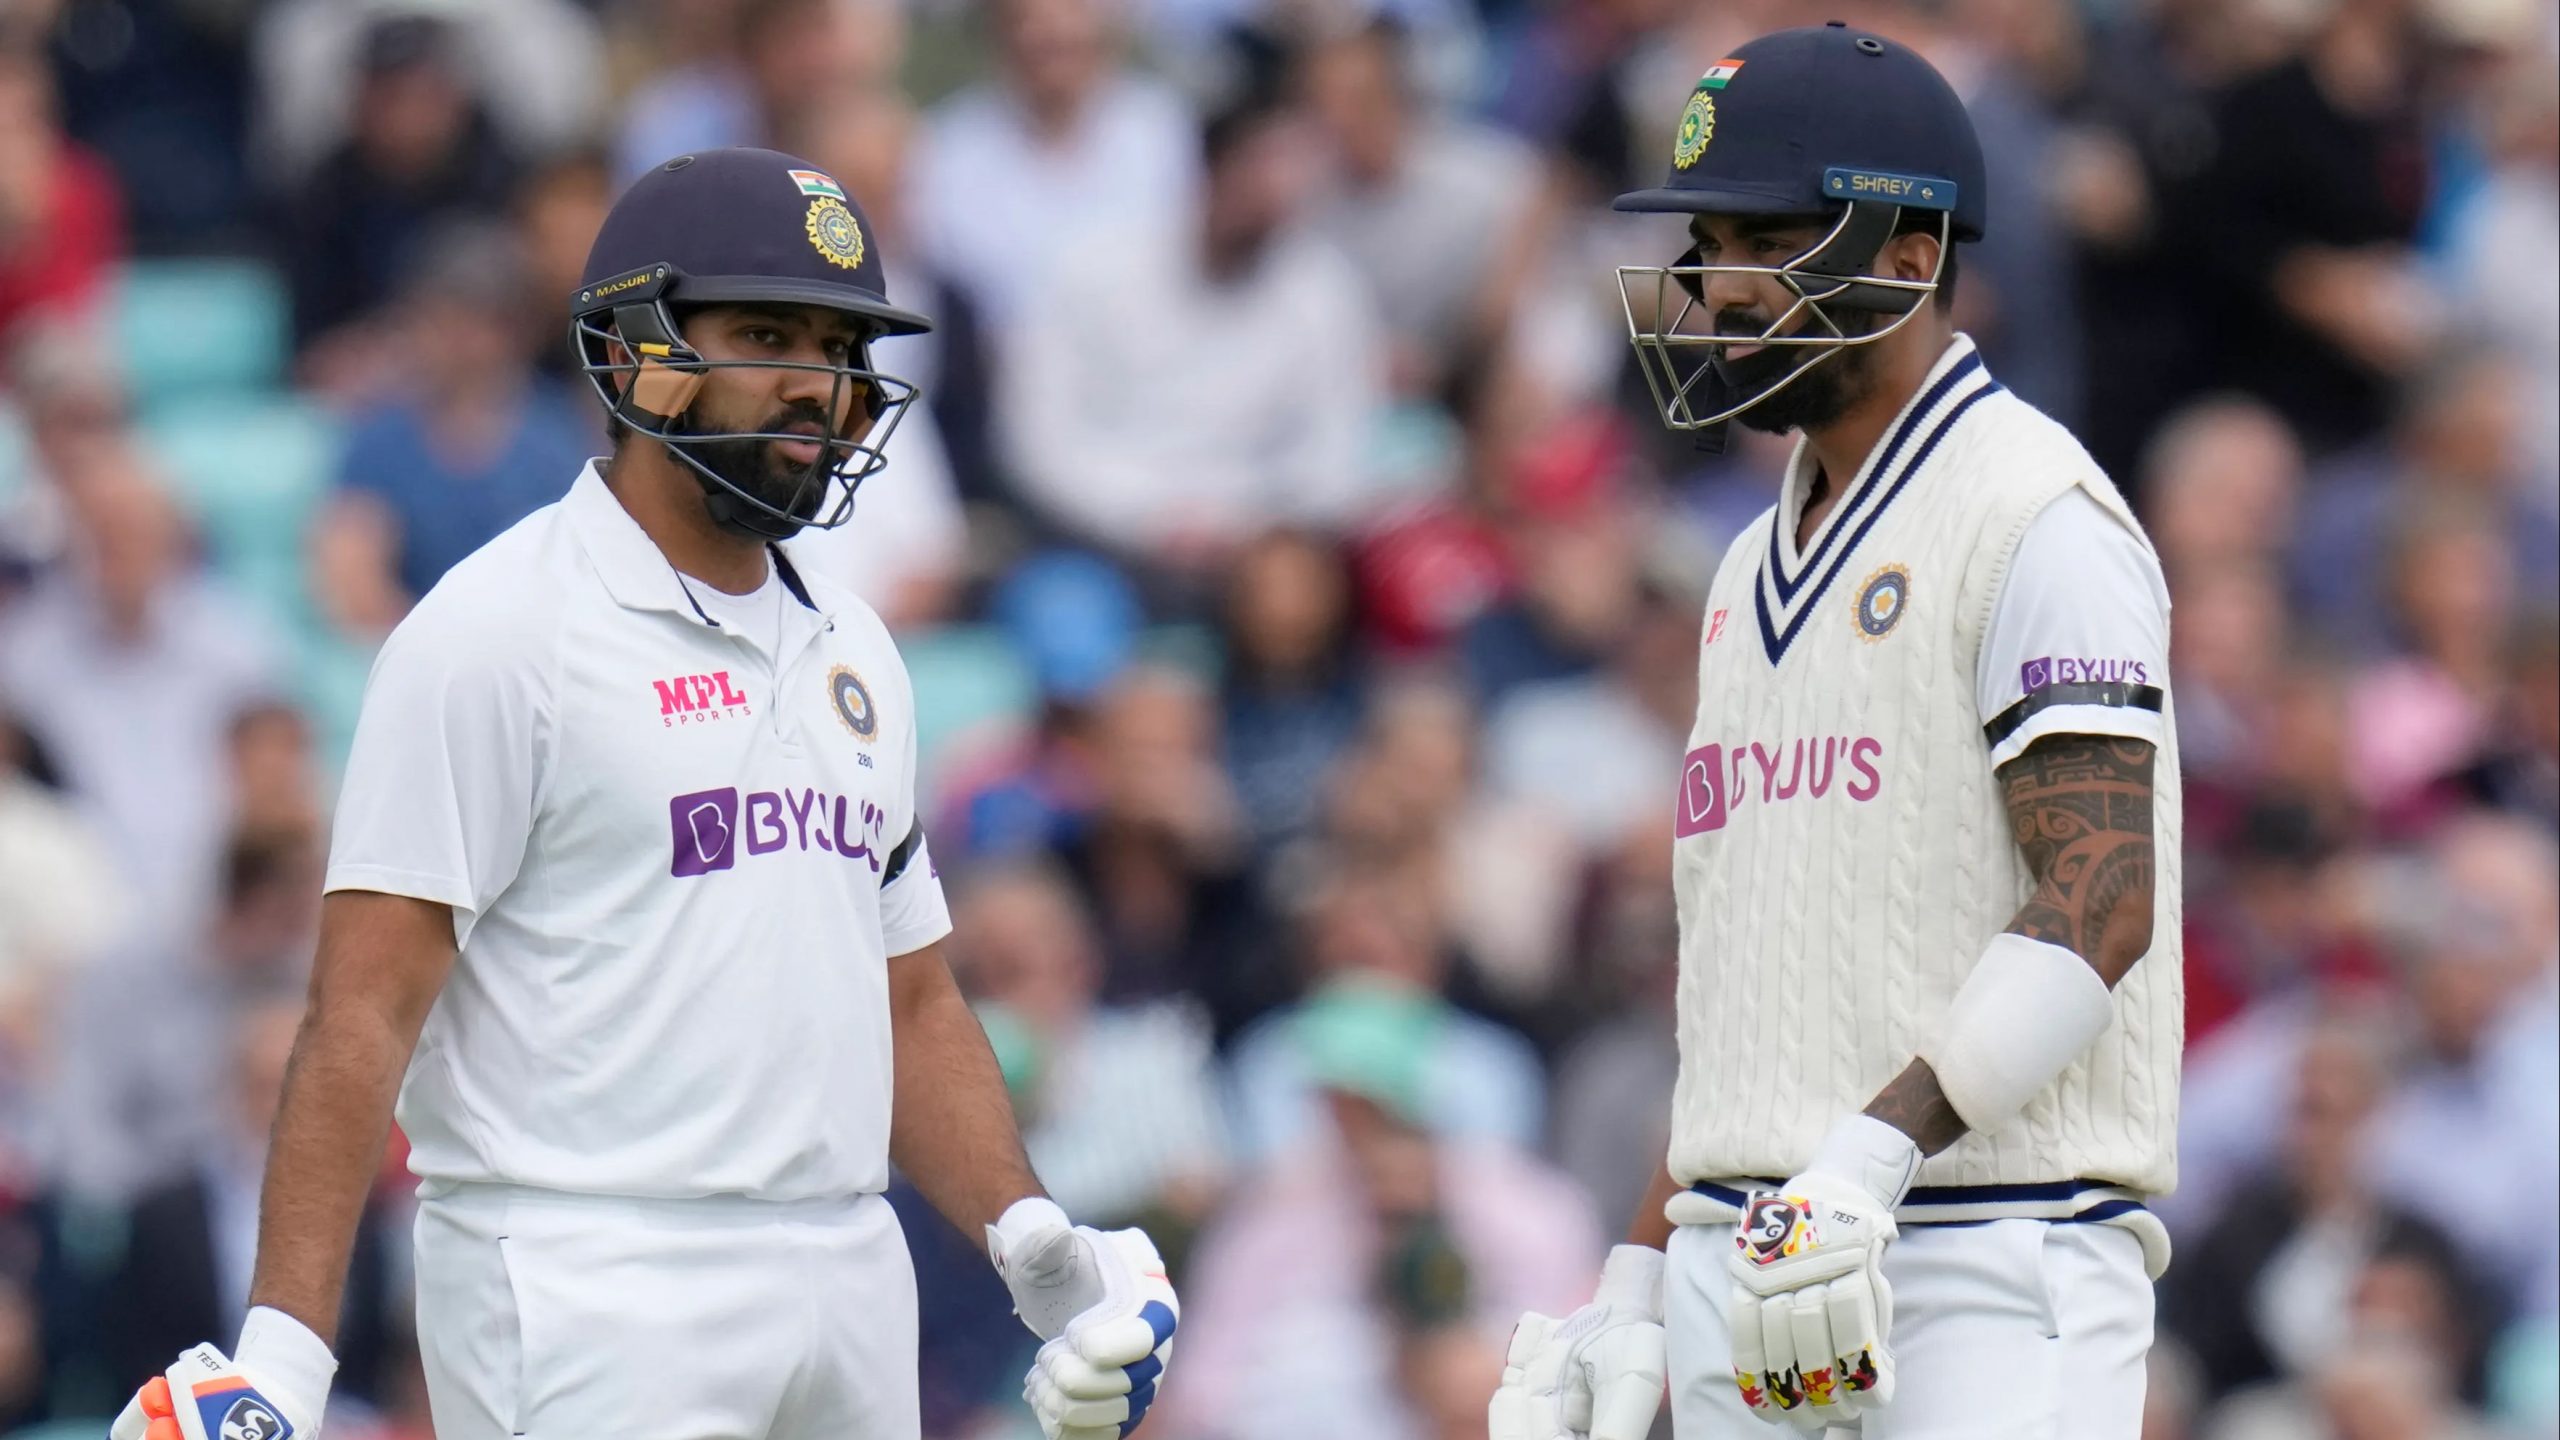 4th Test, Day 2: Openers defiant as India trail England by 56 runs at Stumps